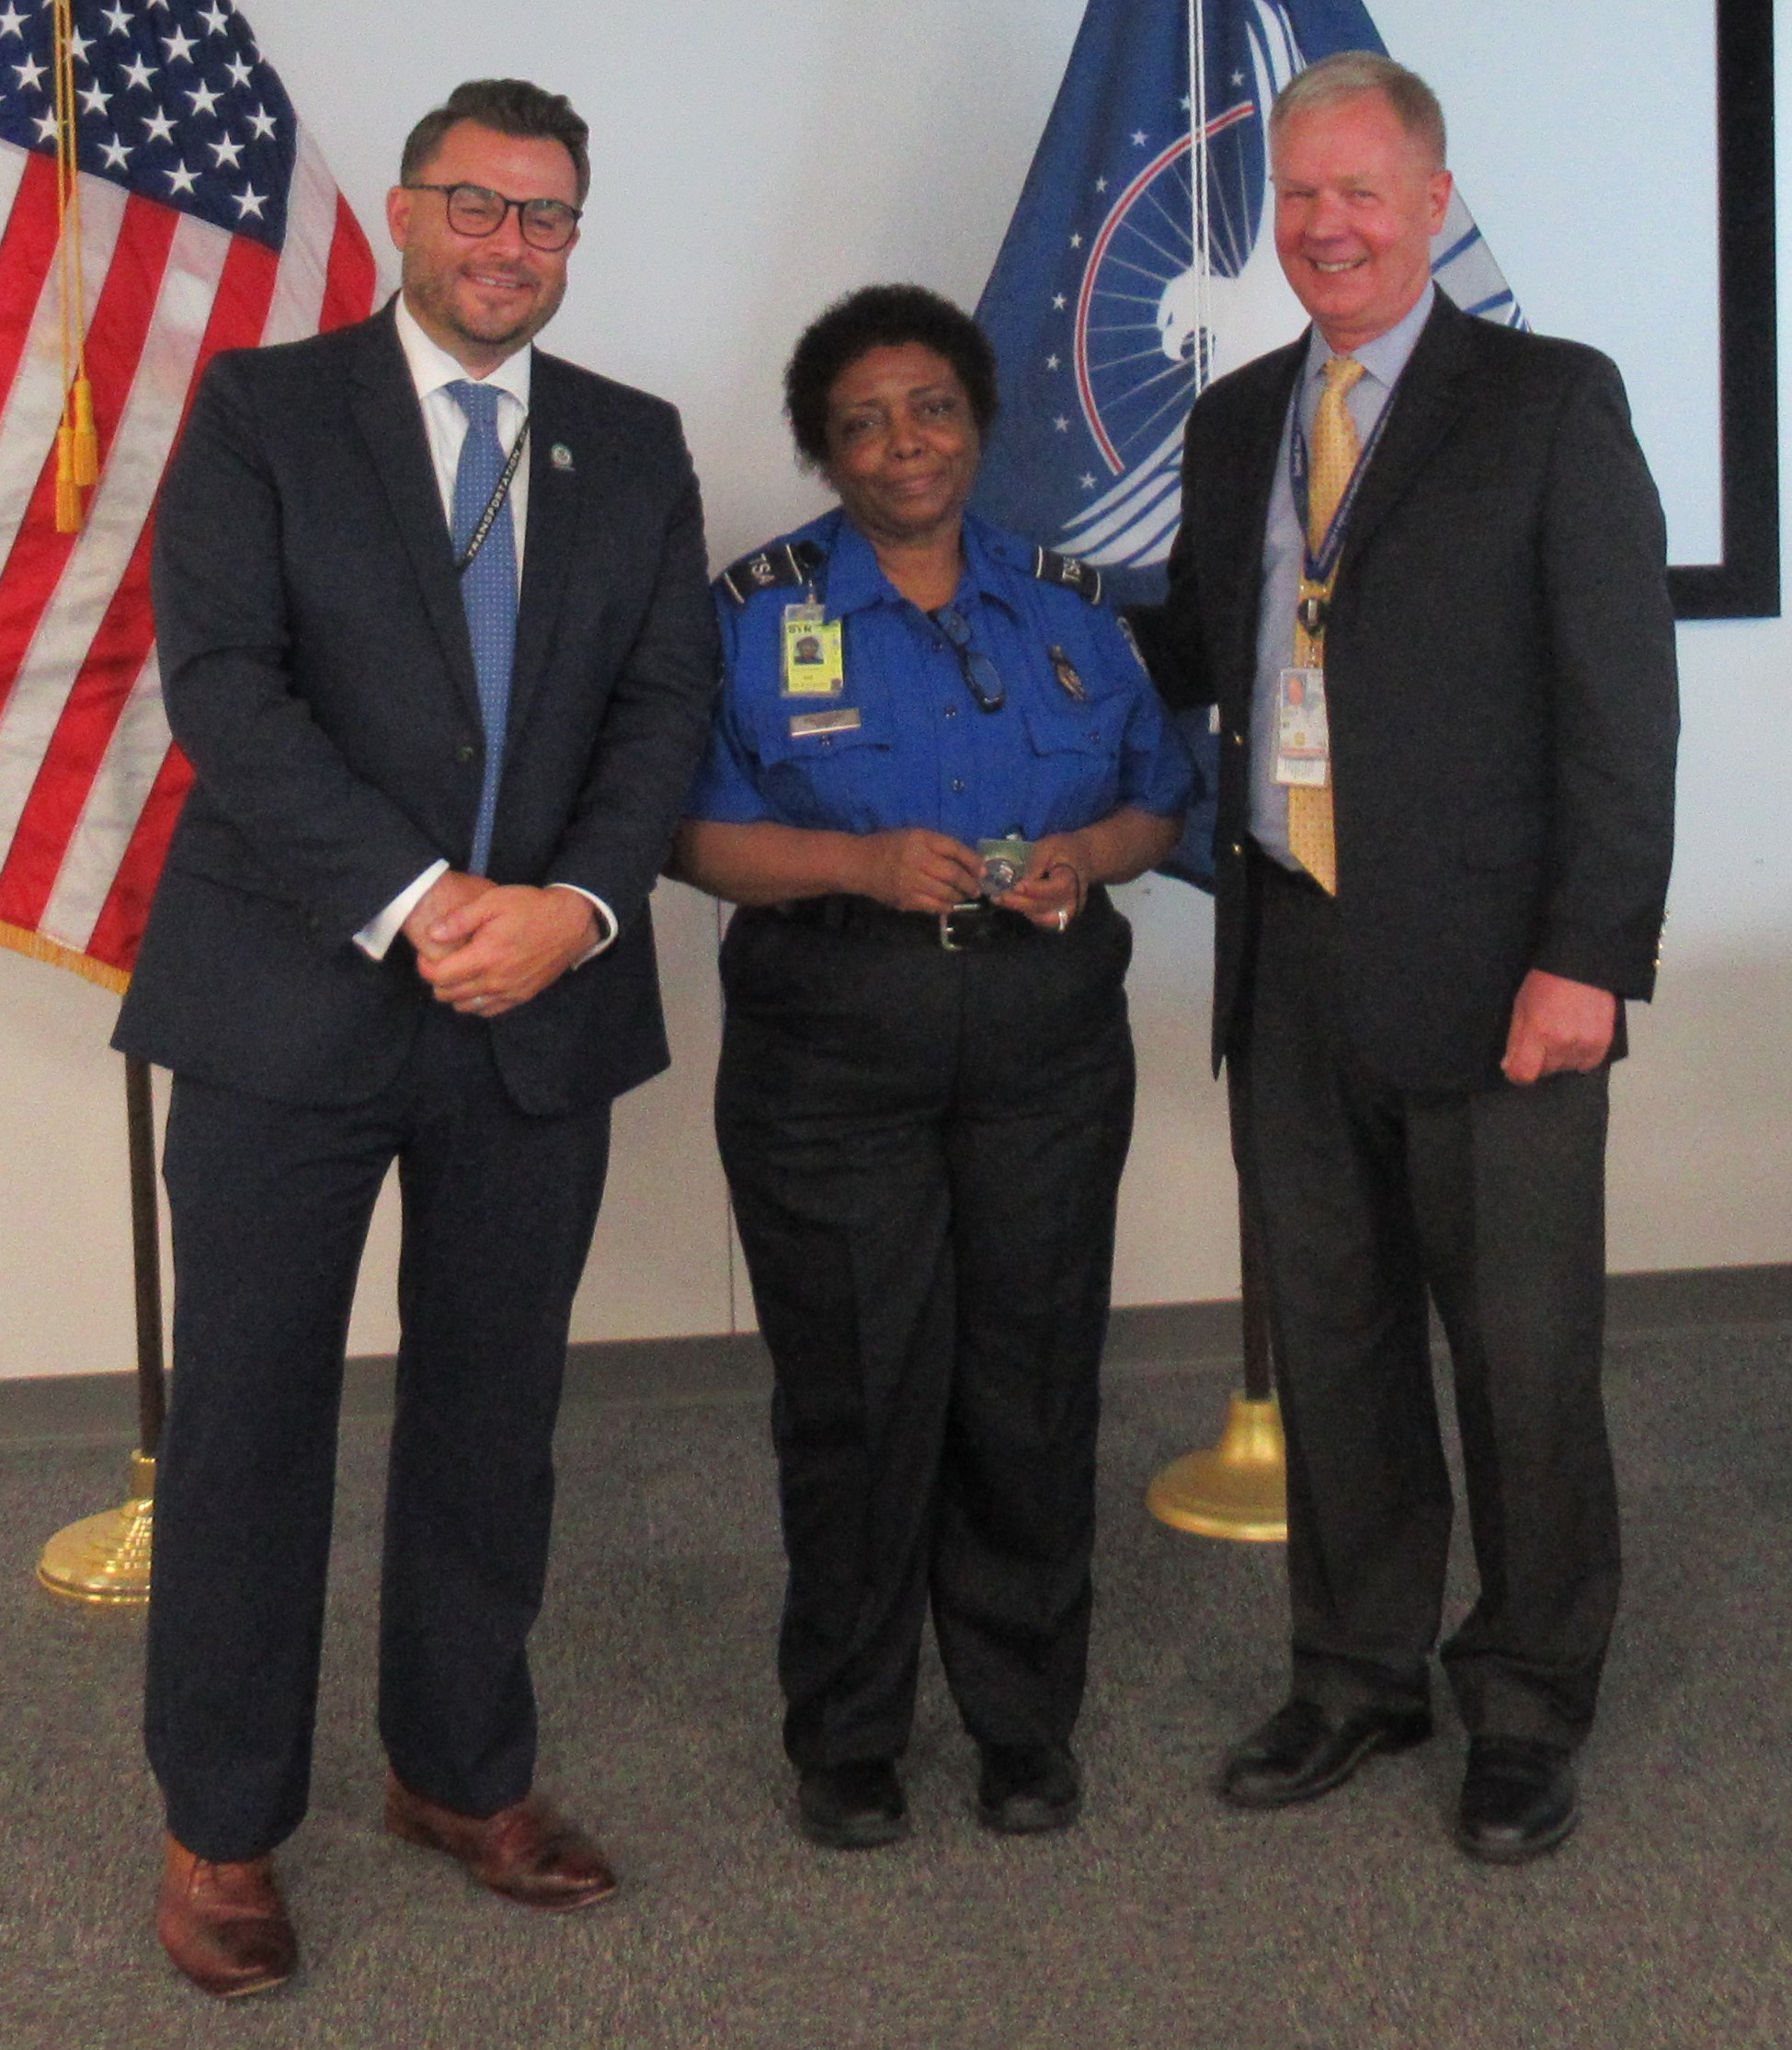 TSA officer Alyce McCampbell was one of several TSA employees at Syracuse Hancock International Airport who was recognized for 20 years of service to TSA. She was awarded a coin from TSA Federal Security Director Bart R. Johnson (right) and TSA Deputy Federal Security Director Brian Bushnell. (TSA photo)